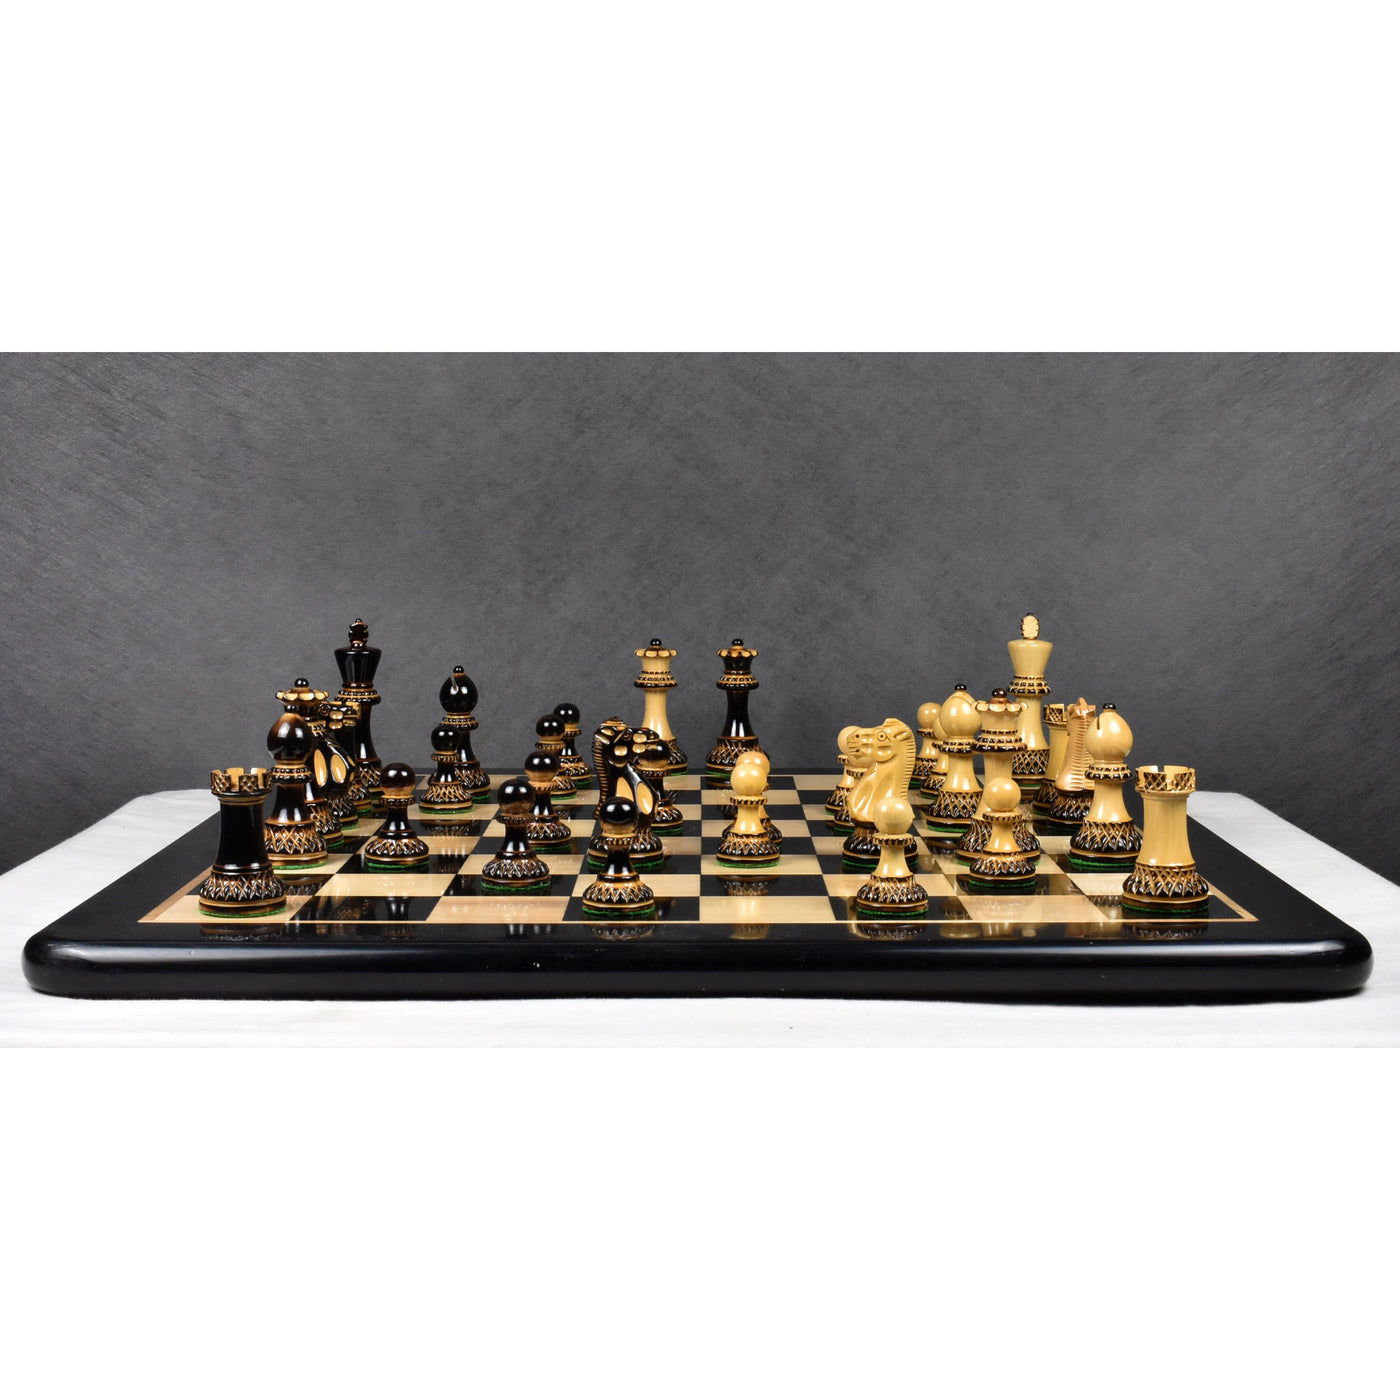 Slightly Imperfect 3.9" Parker Staunton Carved Chess Set - Chess Pieces Only- Lacquer (gloss)finish Boxwood